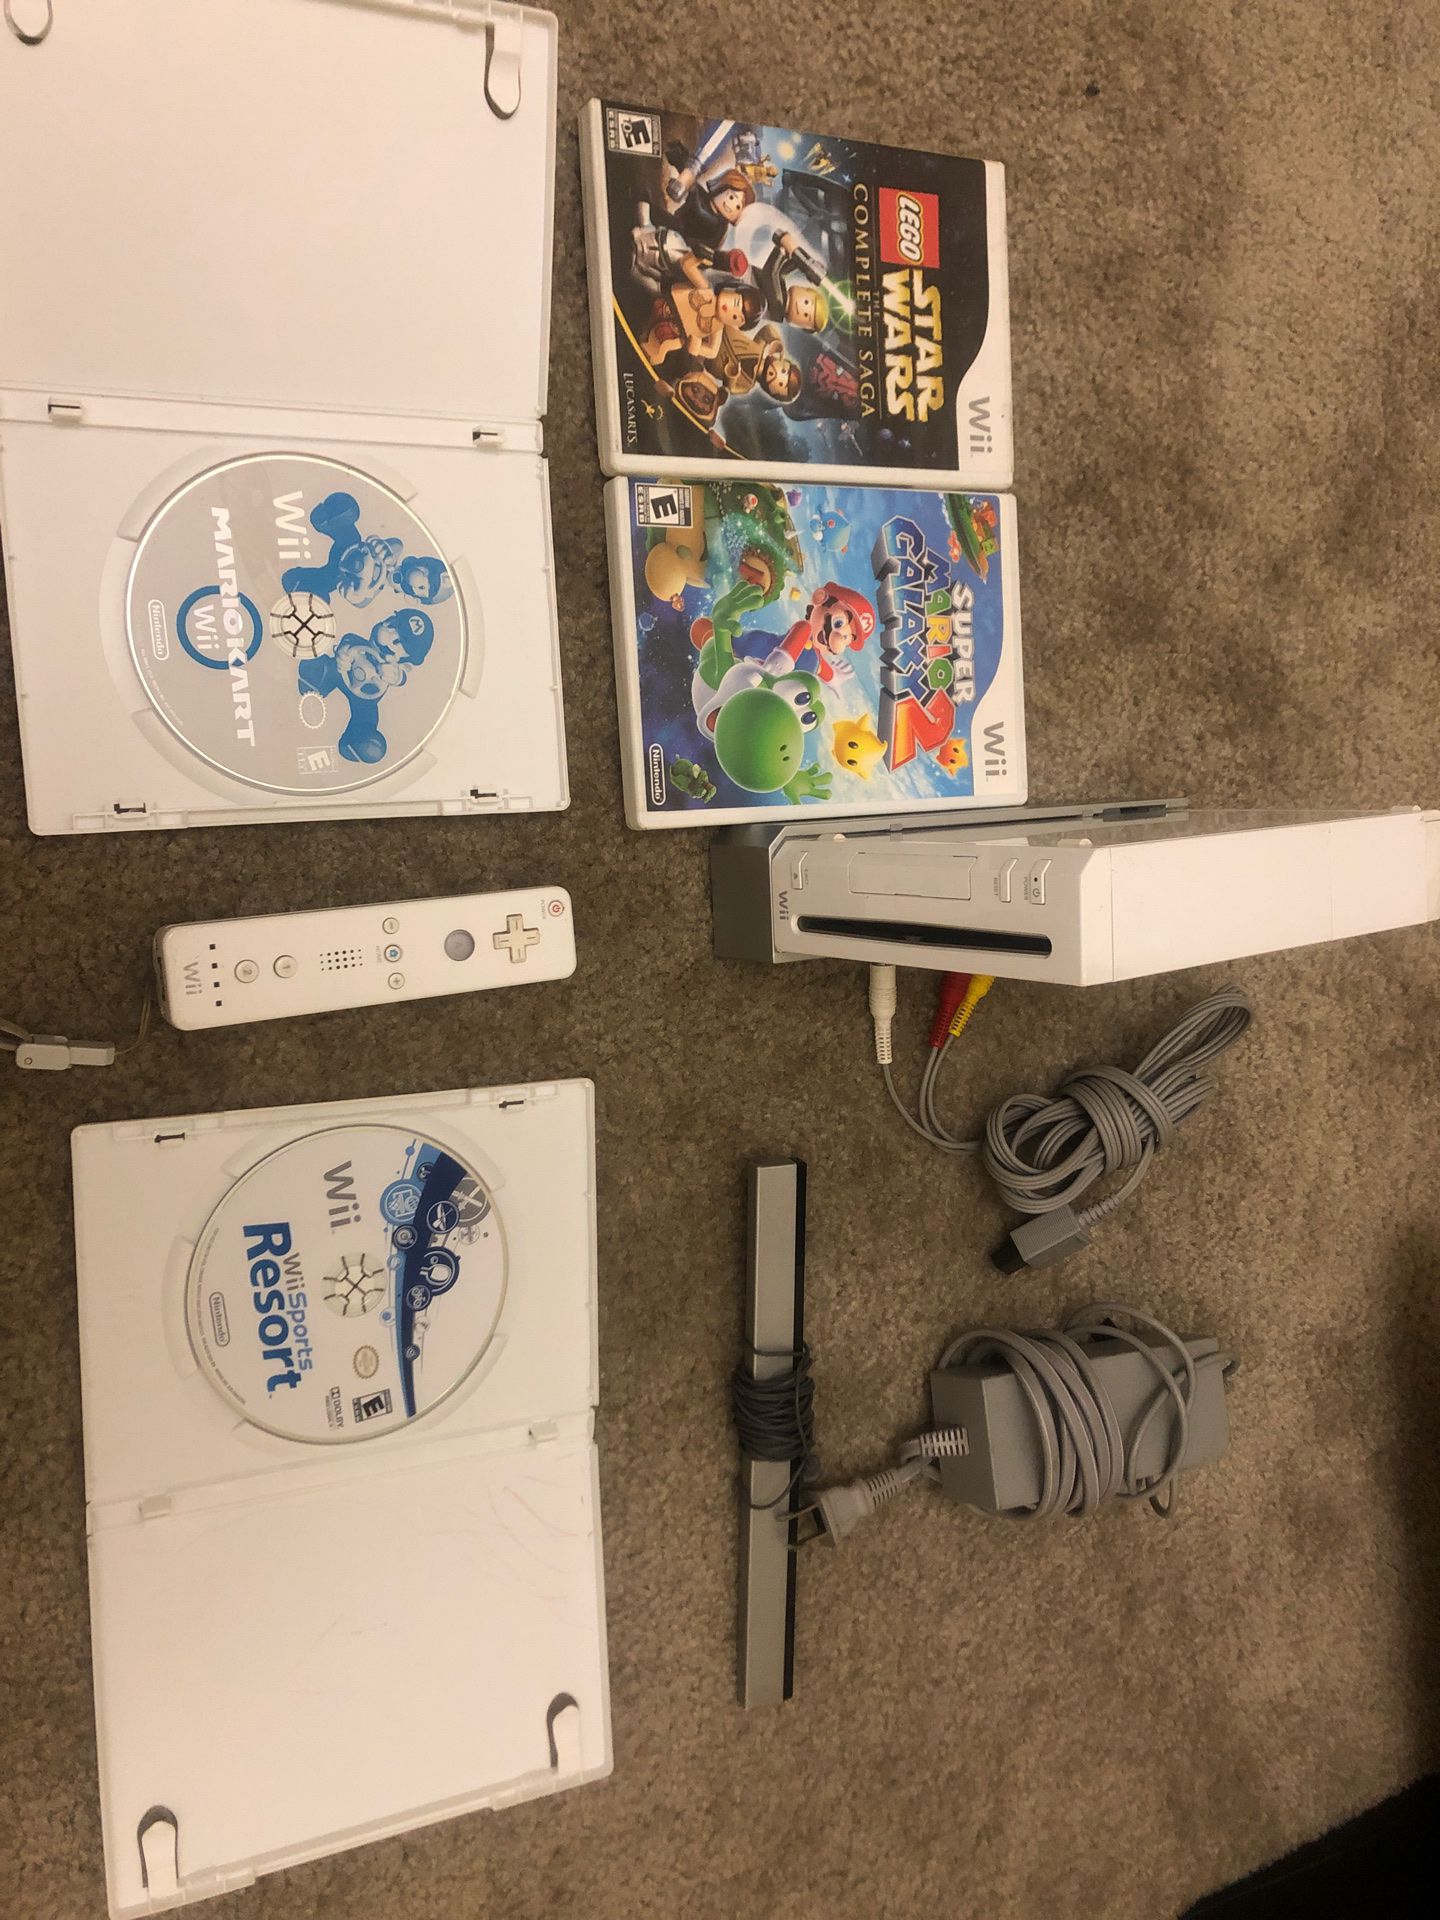 Wii CONSOLE+ 4 GAMES. With one remote control and all cords.